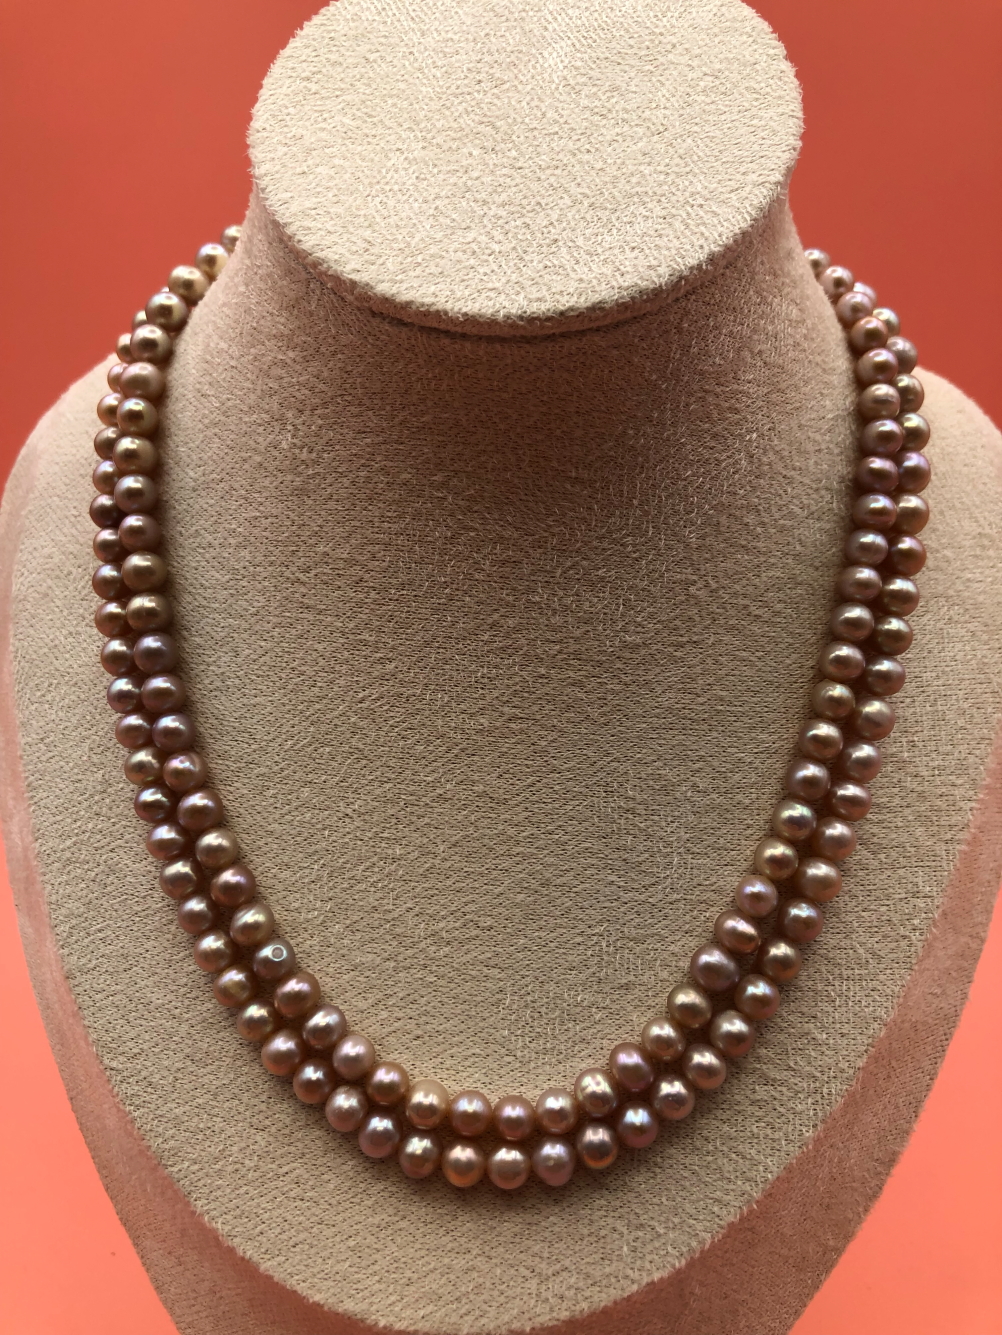 TWO STRINGS OF CULTURED PEARLS. A PINK 82cm ROPE WITH A 9ct HALLMARKED GOLD CLASP, AND A FURTHER - Image 2 of 6